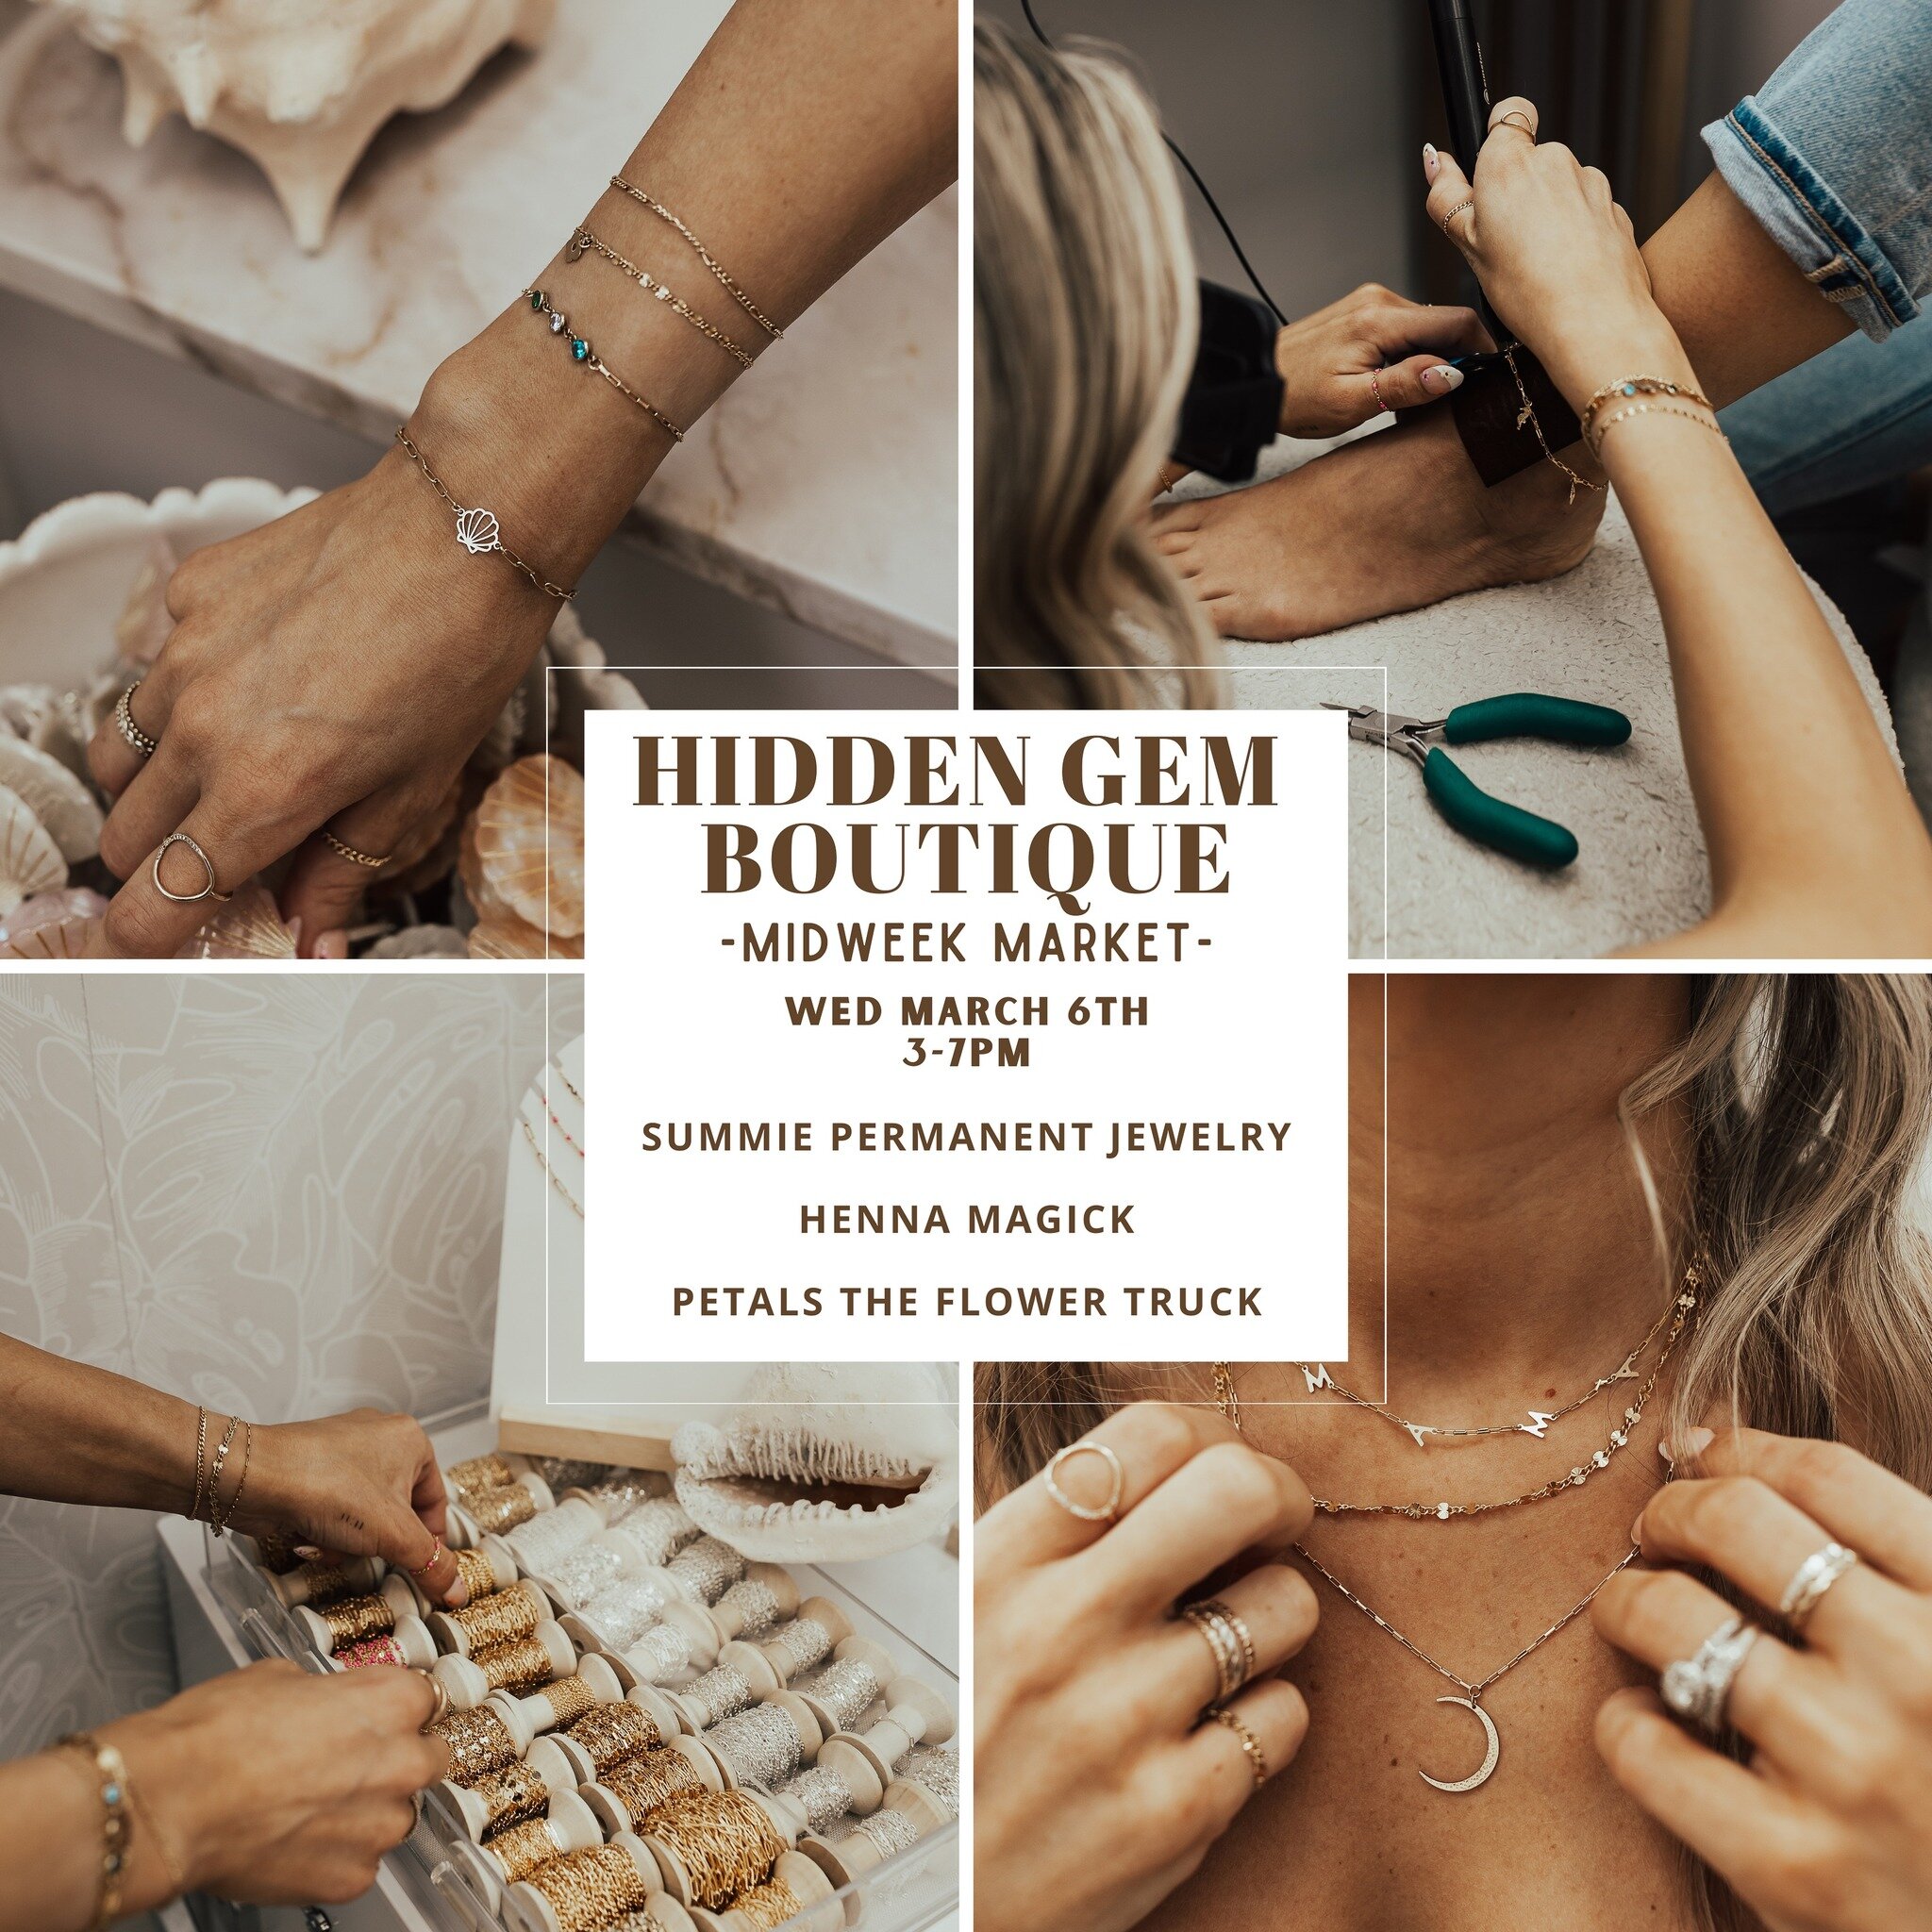 SO SO excited about this PopUp at @hiddengem.boutique for their Midweek Market! It&rsquo;s next Wednesday 3/6 from 3-7pm🪴✨
Featuring some amazing local businesses to shop and connect with, this is an event you&rsquo;re not gunna wanna miss! 

Inda f